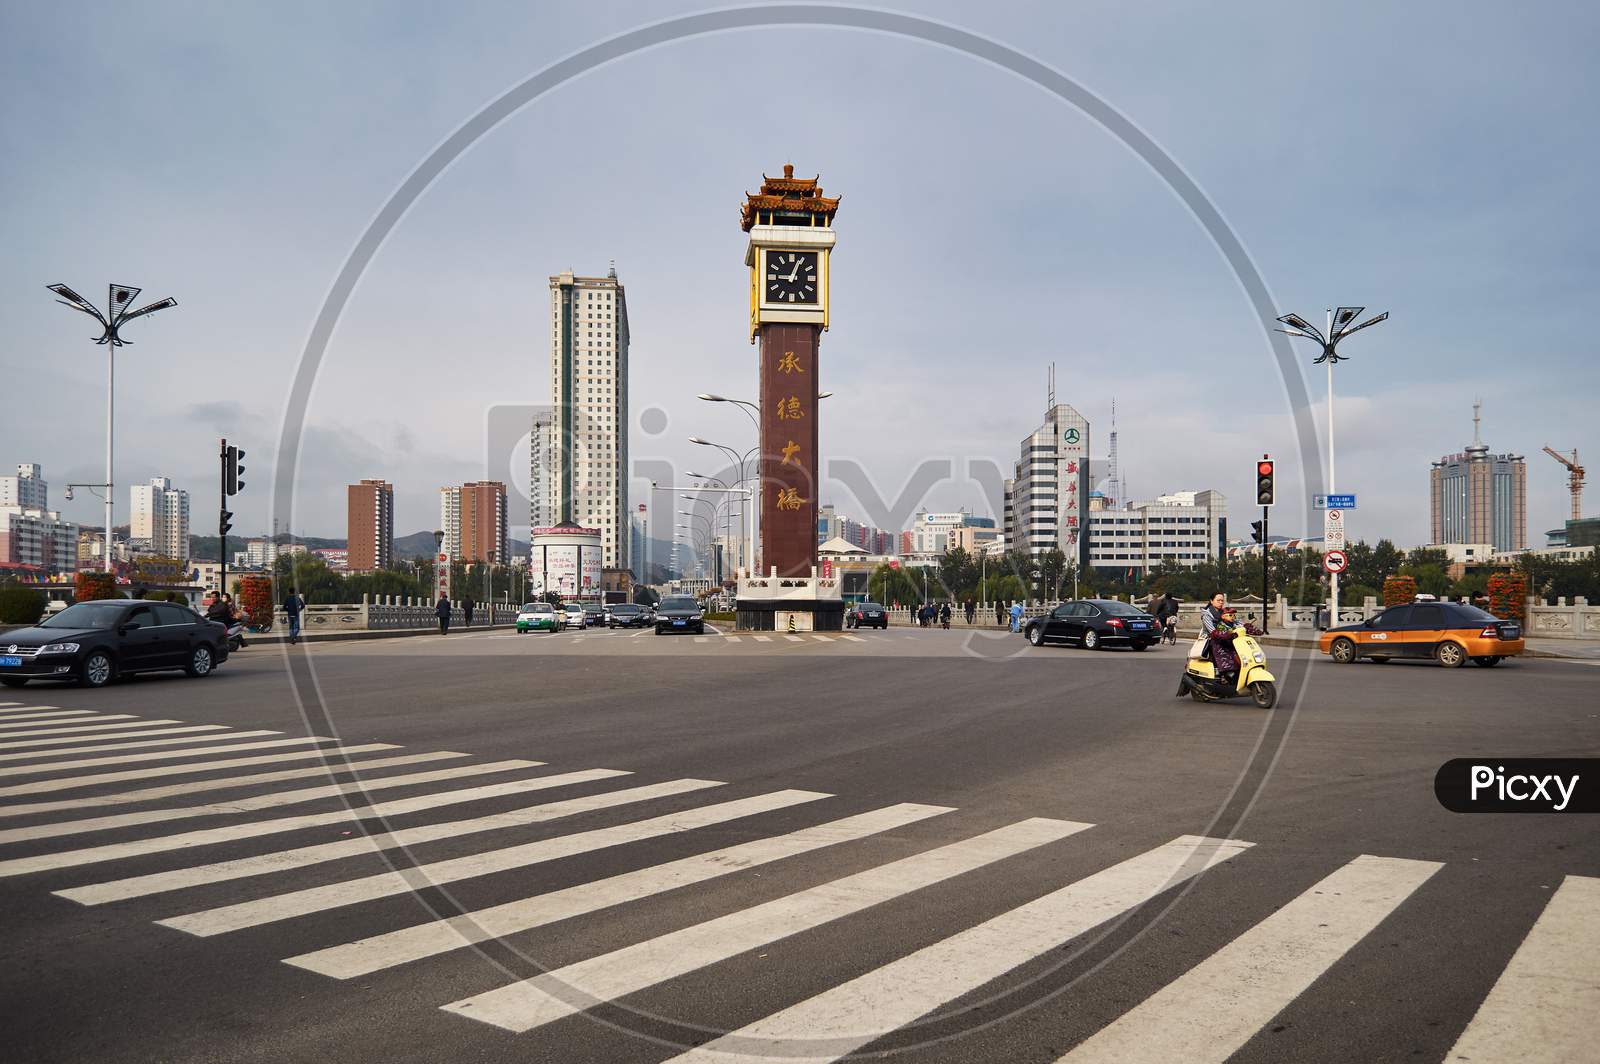 Clock Tower In Chengde City Center In Hebei Province In North China.